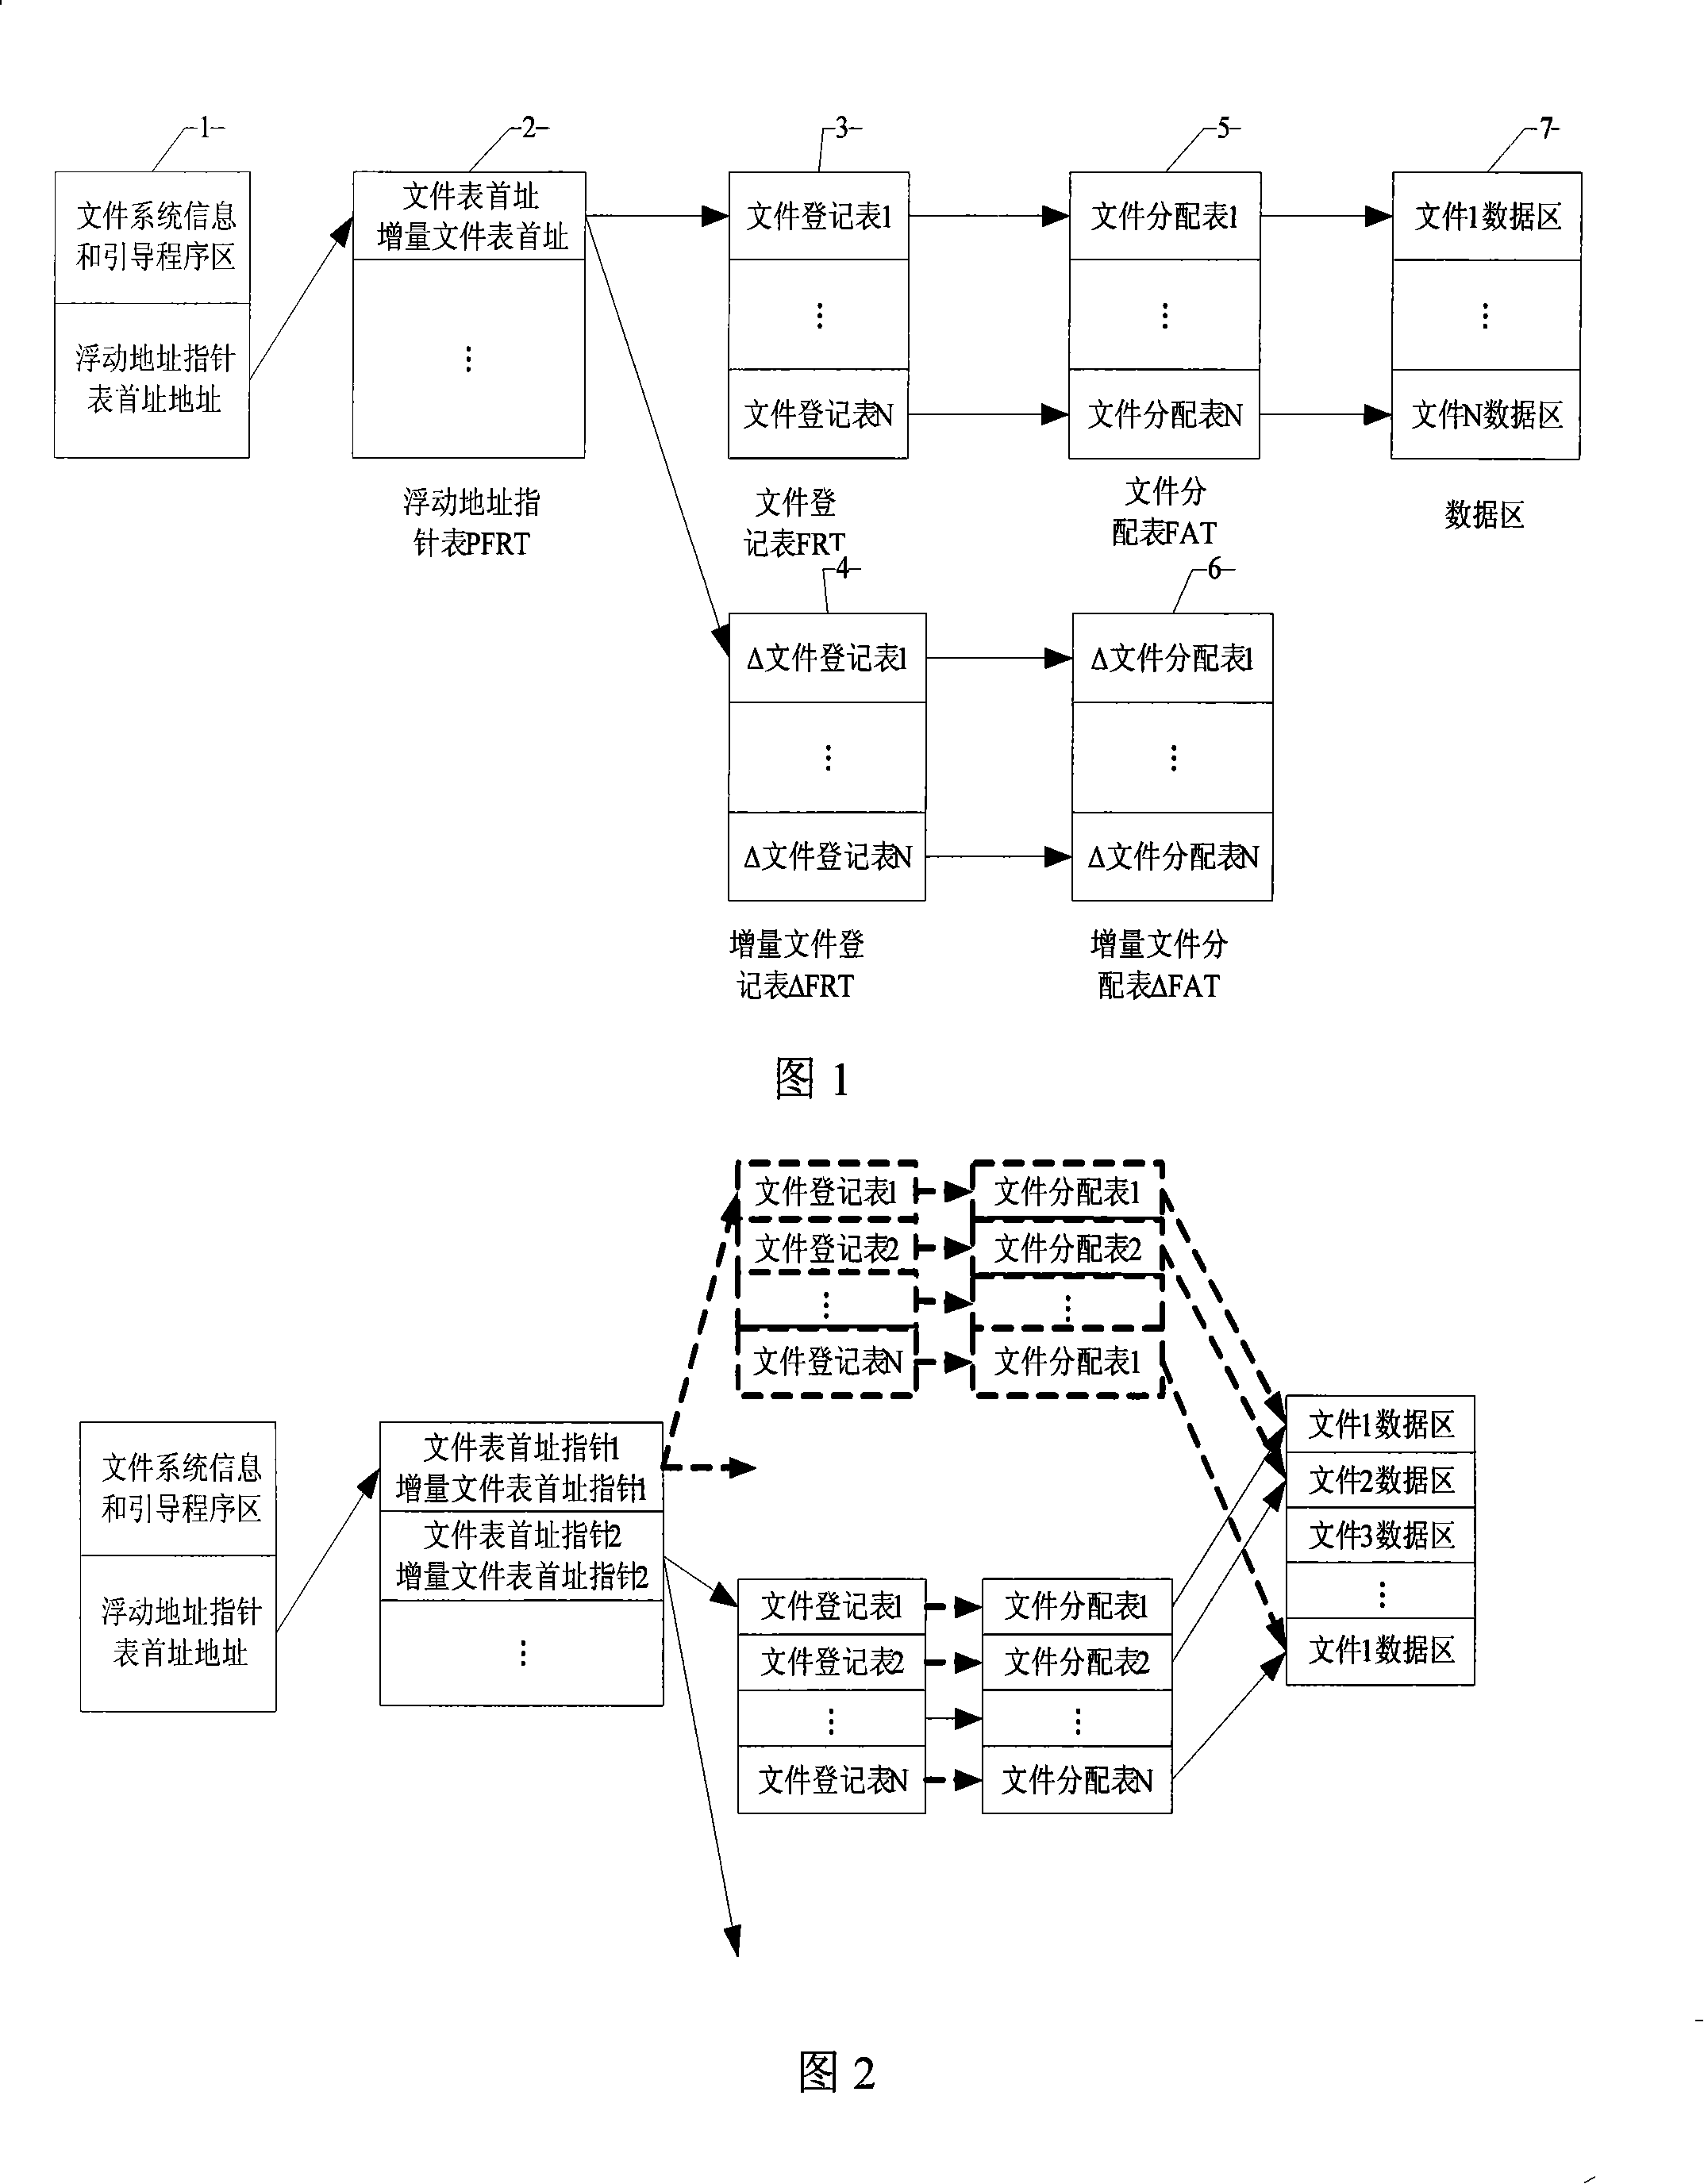 Method for building file systems on NAND flash memory in embedded system